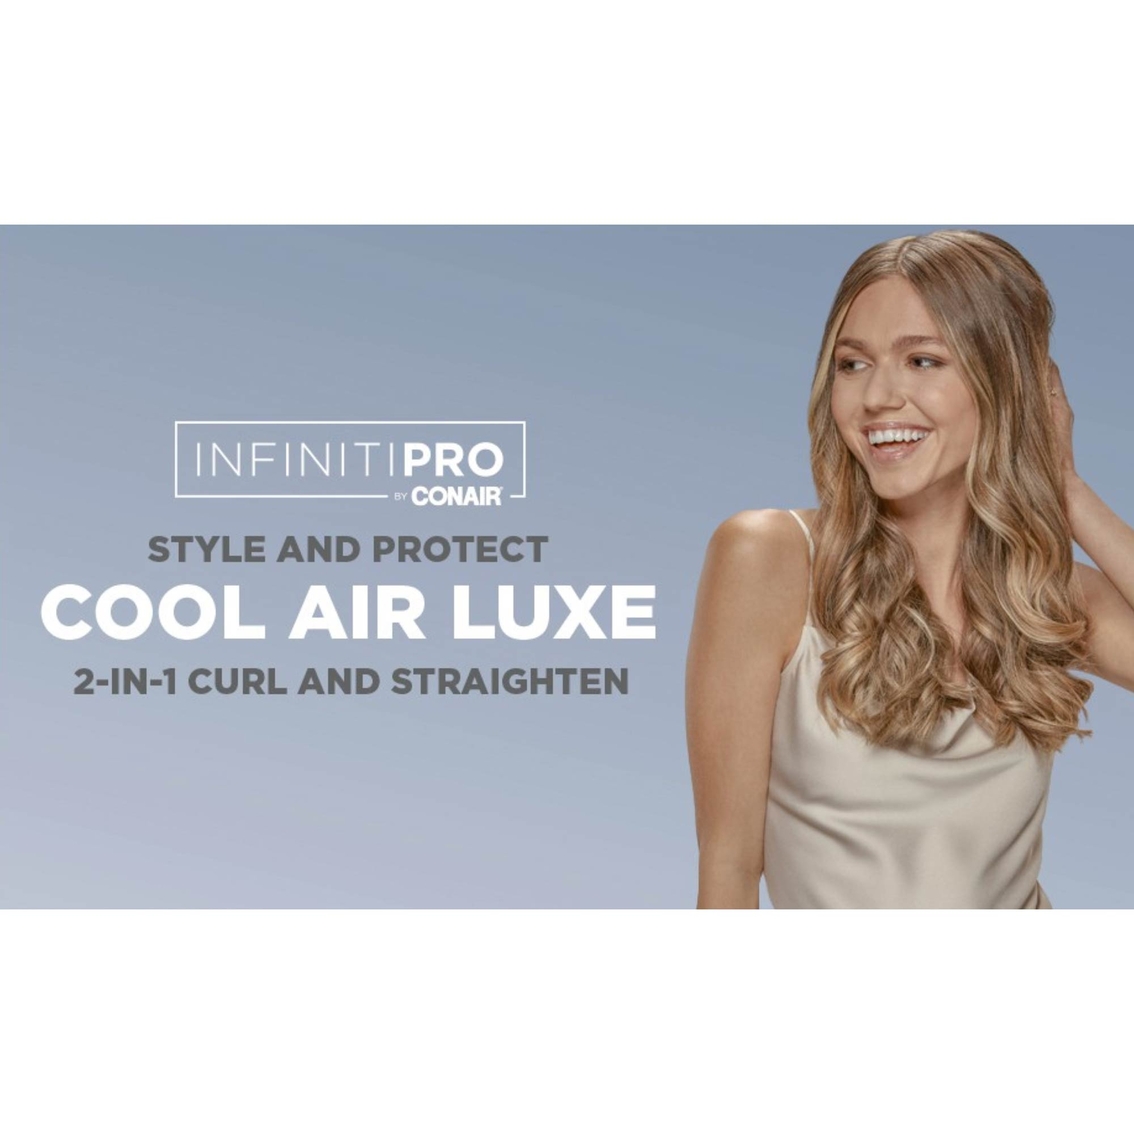 Conair InfPRO Cool Air Luxe Styler - Image 7 of 10